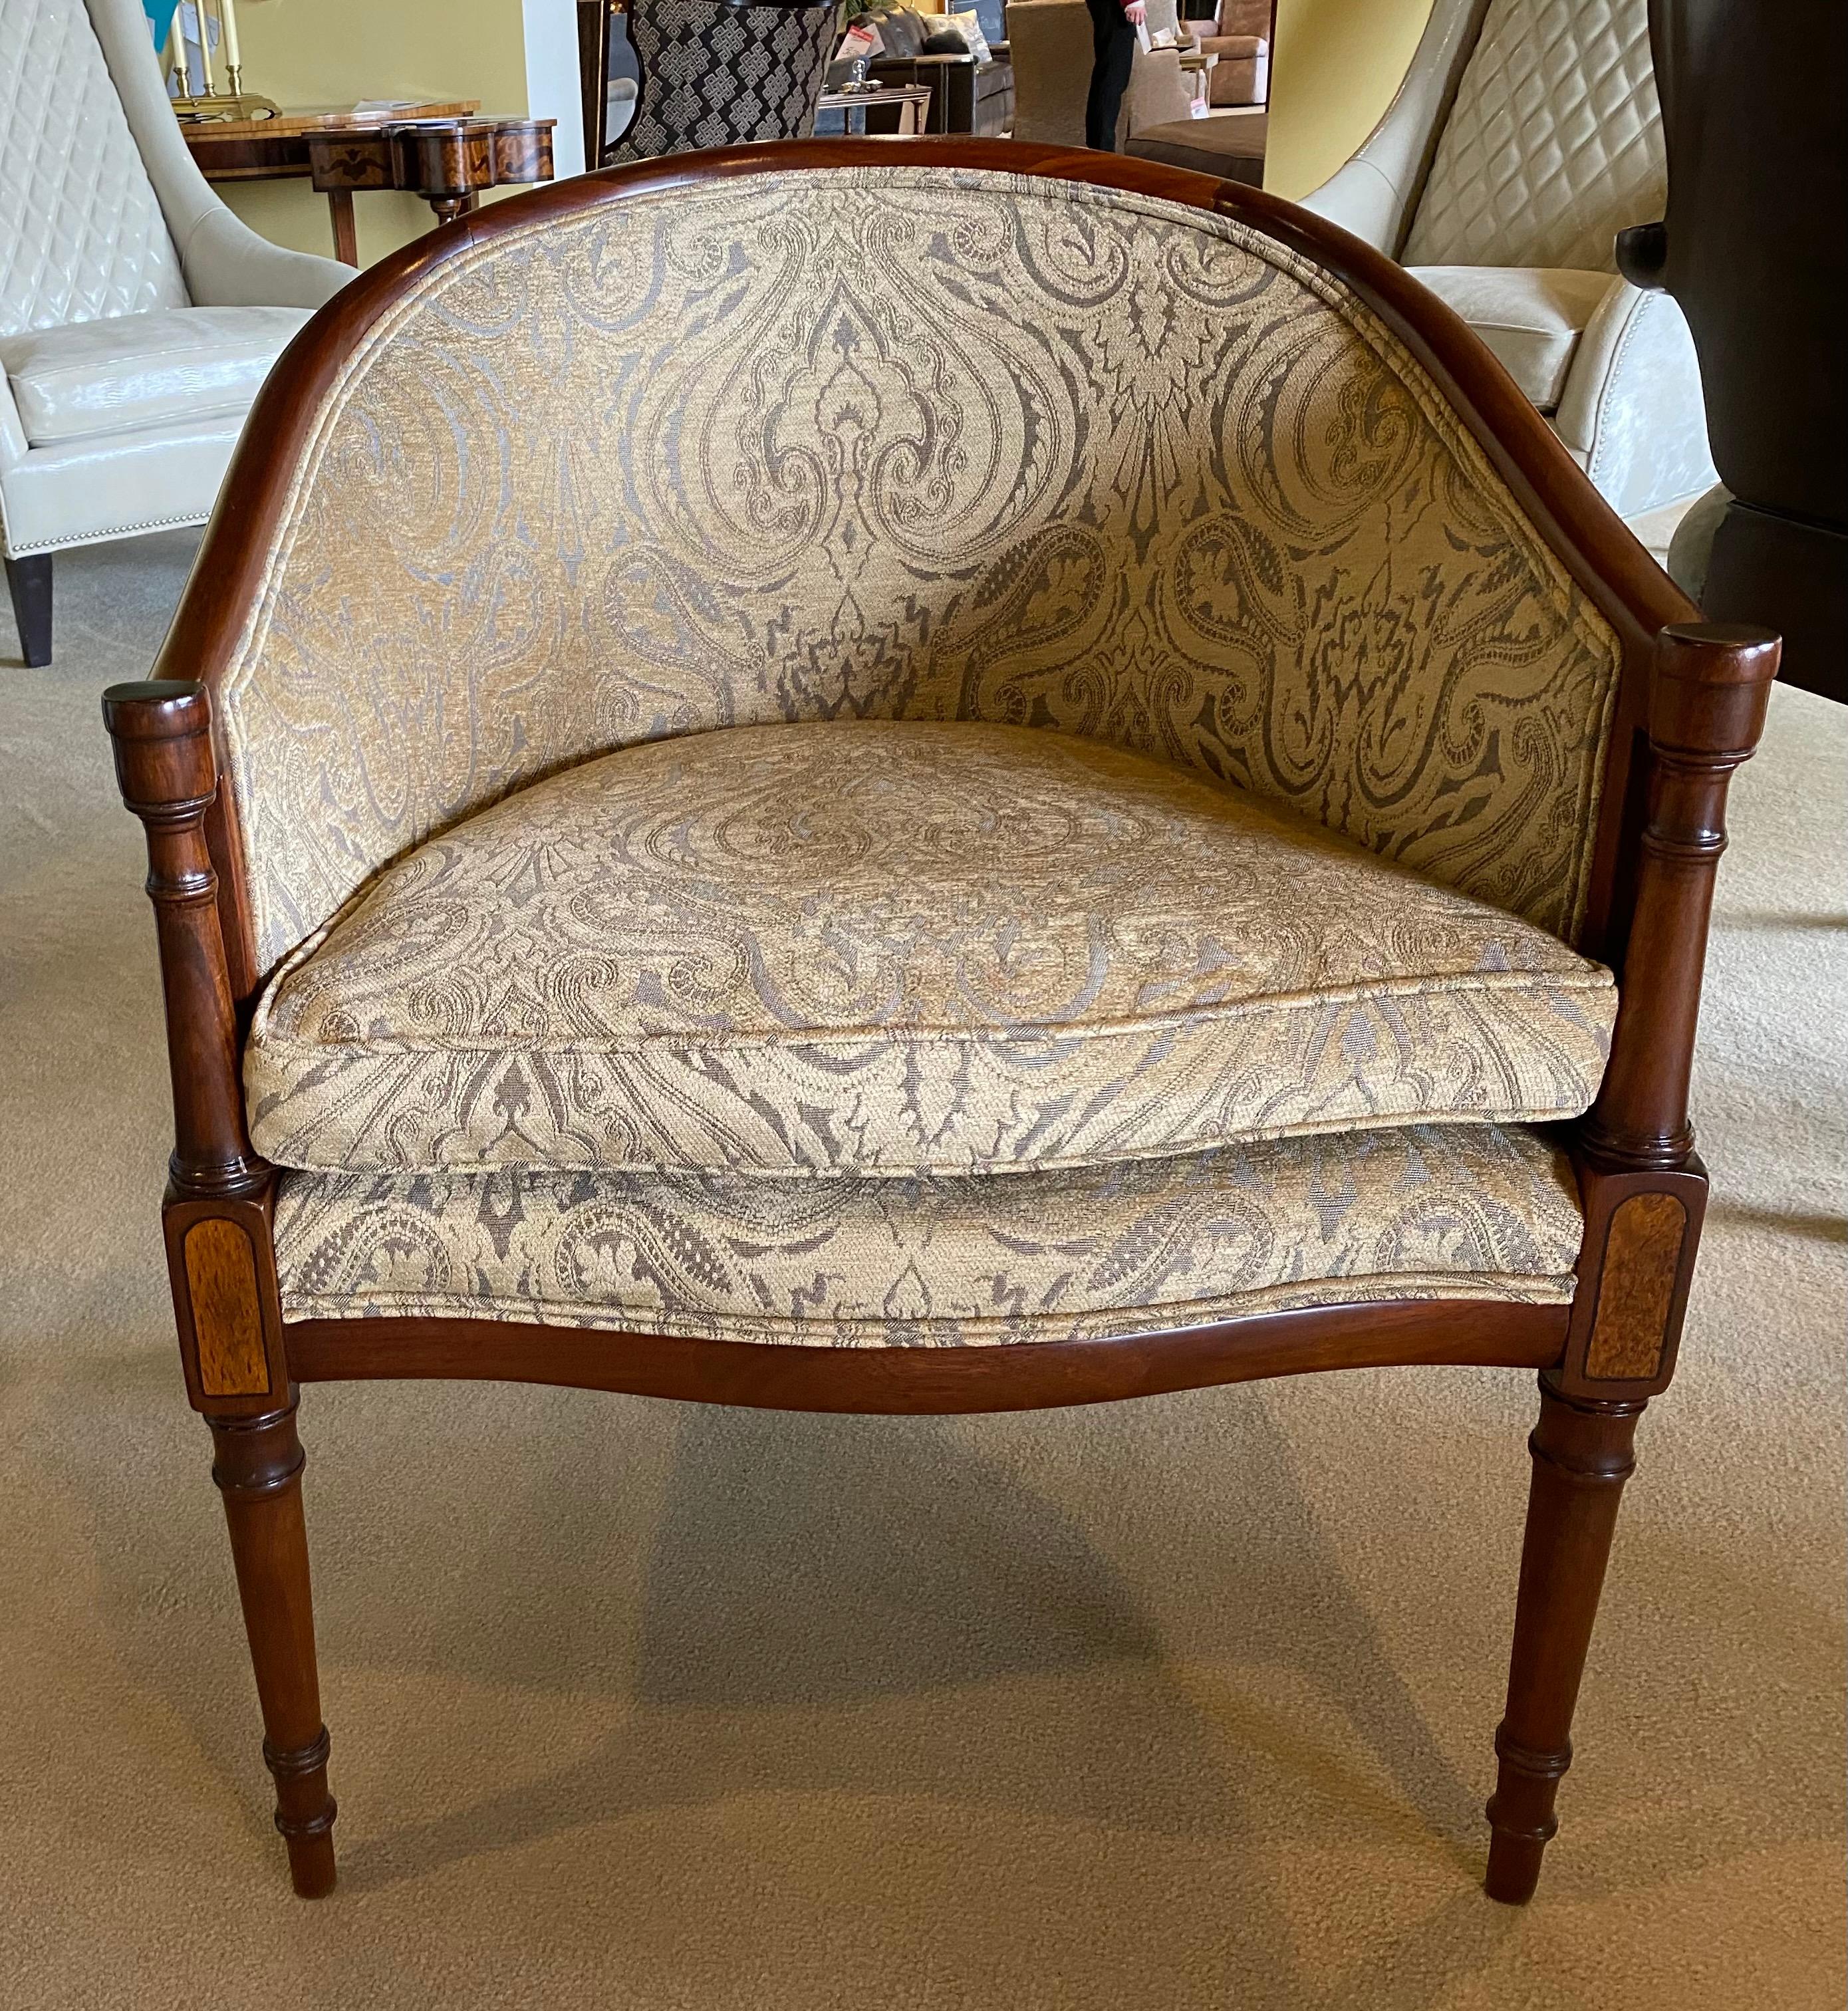 This is a beautifully restored 18th Century style chair with a refinished mahogany frame and new upholstery
originally crafted by Hickory White this frame has the subtle inlay paneling the Hepplewhite style on three sides of the mahogany frame. The